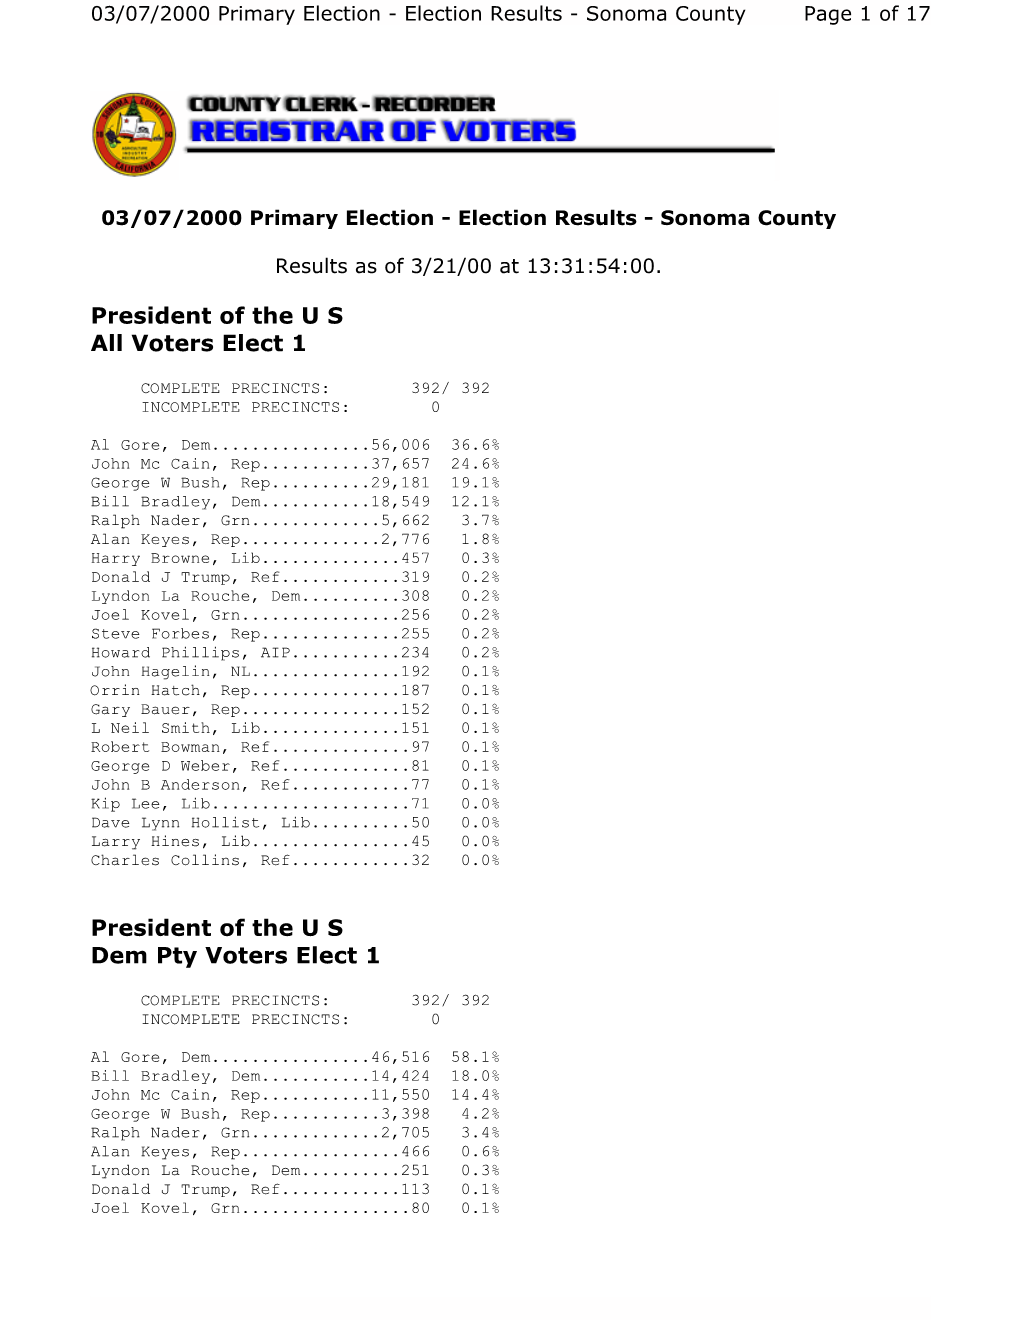 Election Results - Sonoma County Page 1 of 17